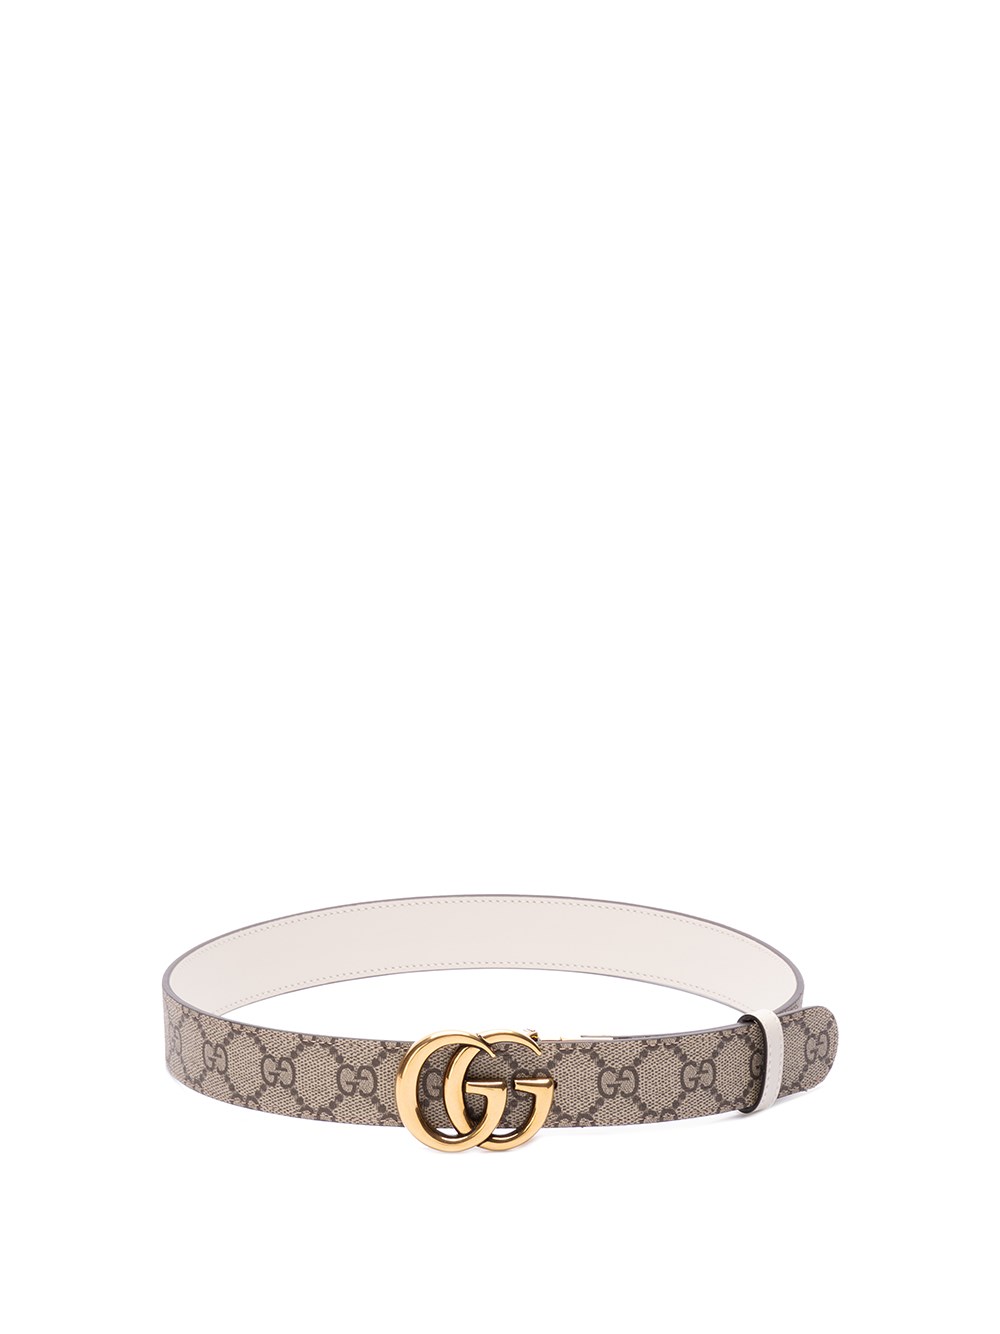 Gucci `gg Marmont` Reversible Belt In Brown